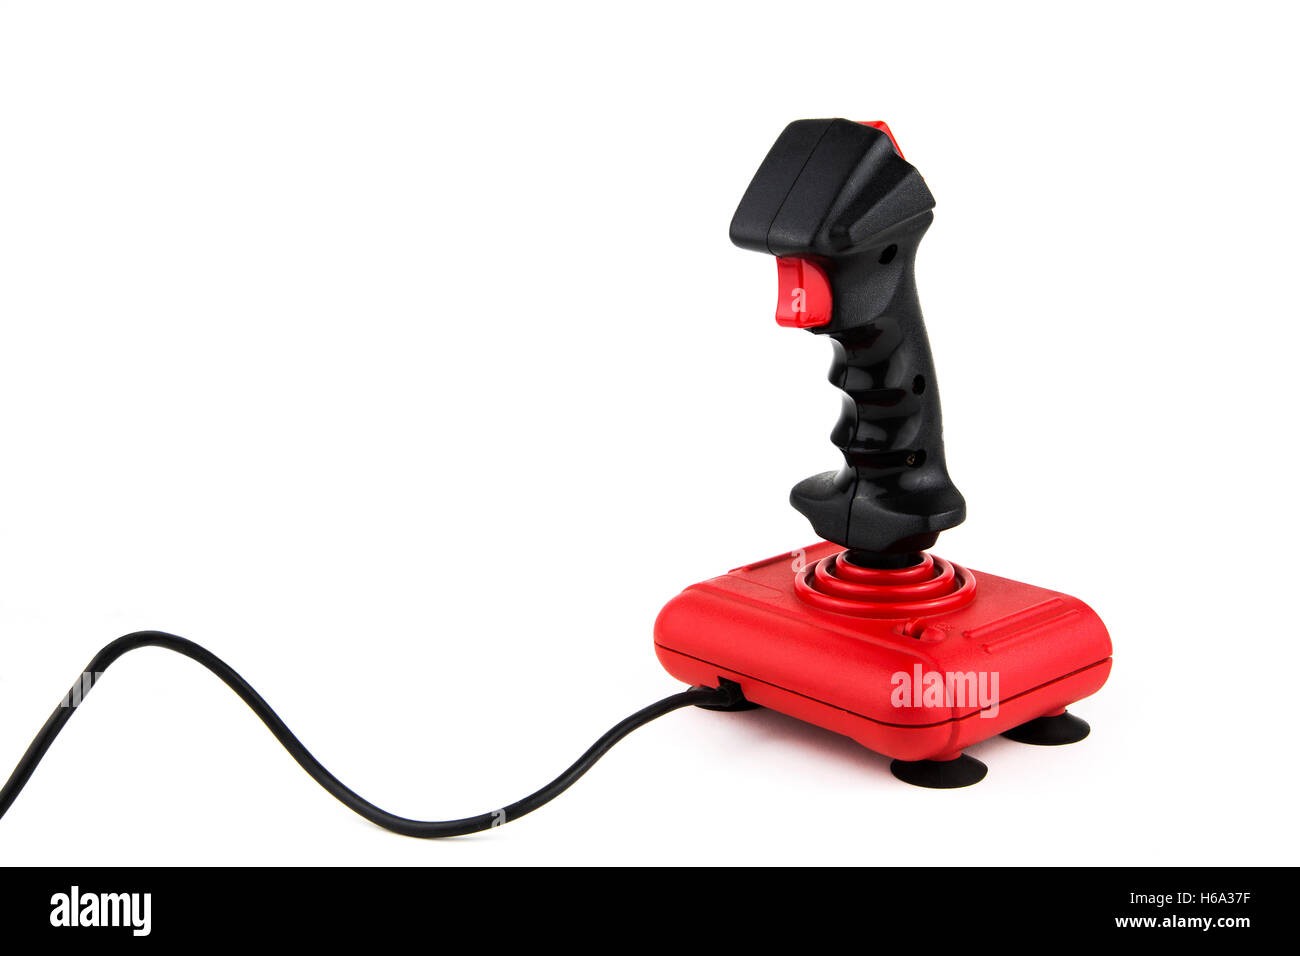 overwhite portrait of a vintage joystick with cable Stock Photo